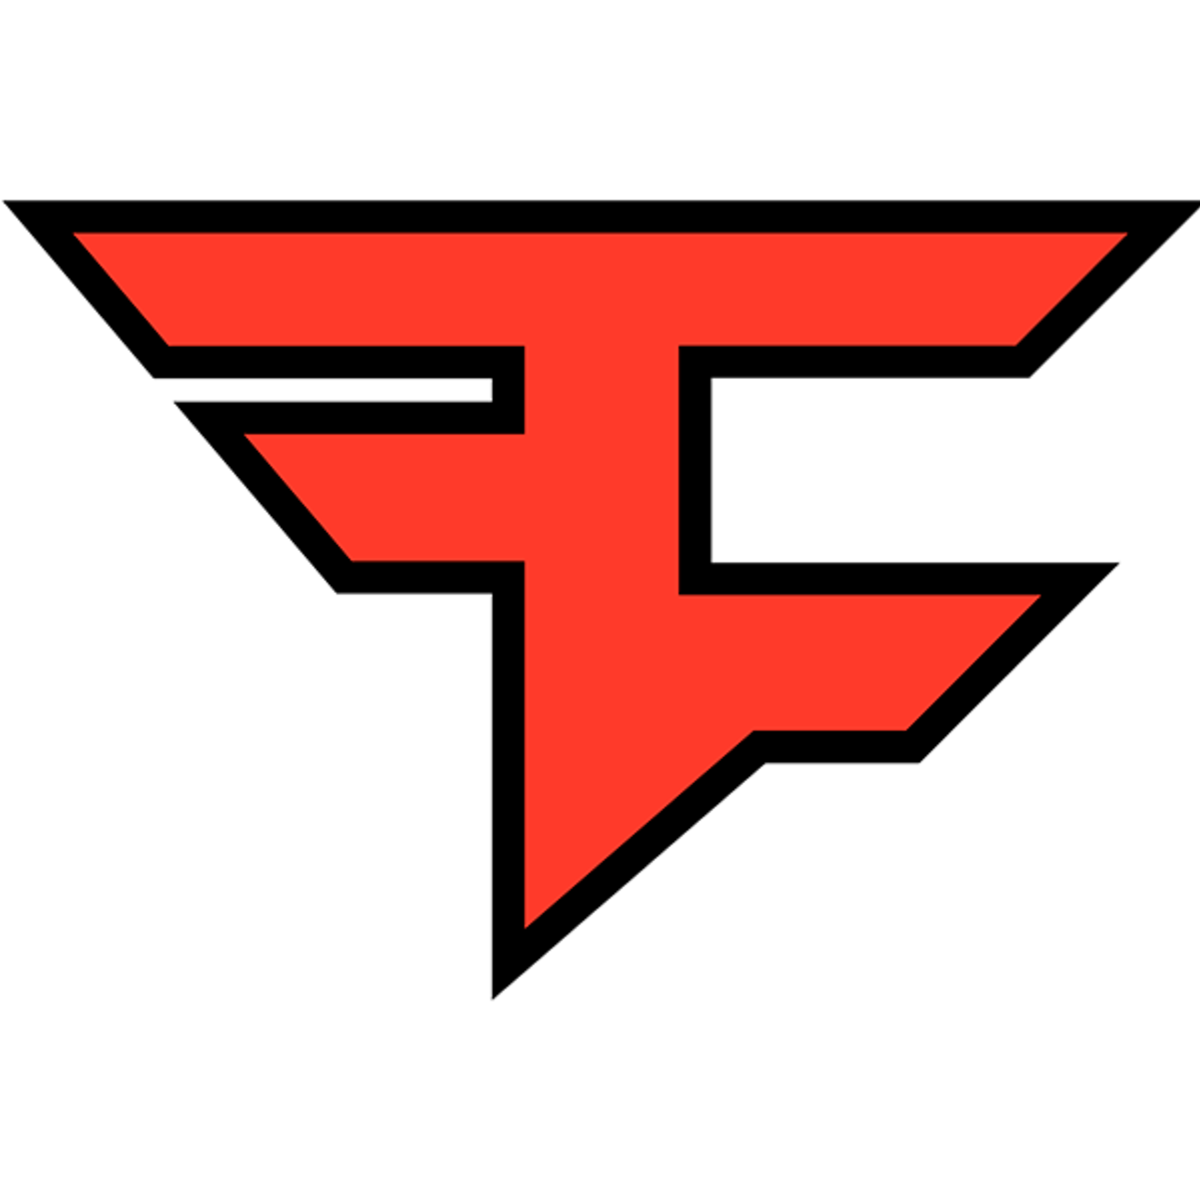 FaZe vs Eternal Fire Prediction: The Turks can give a fight